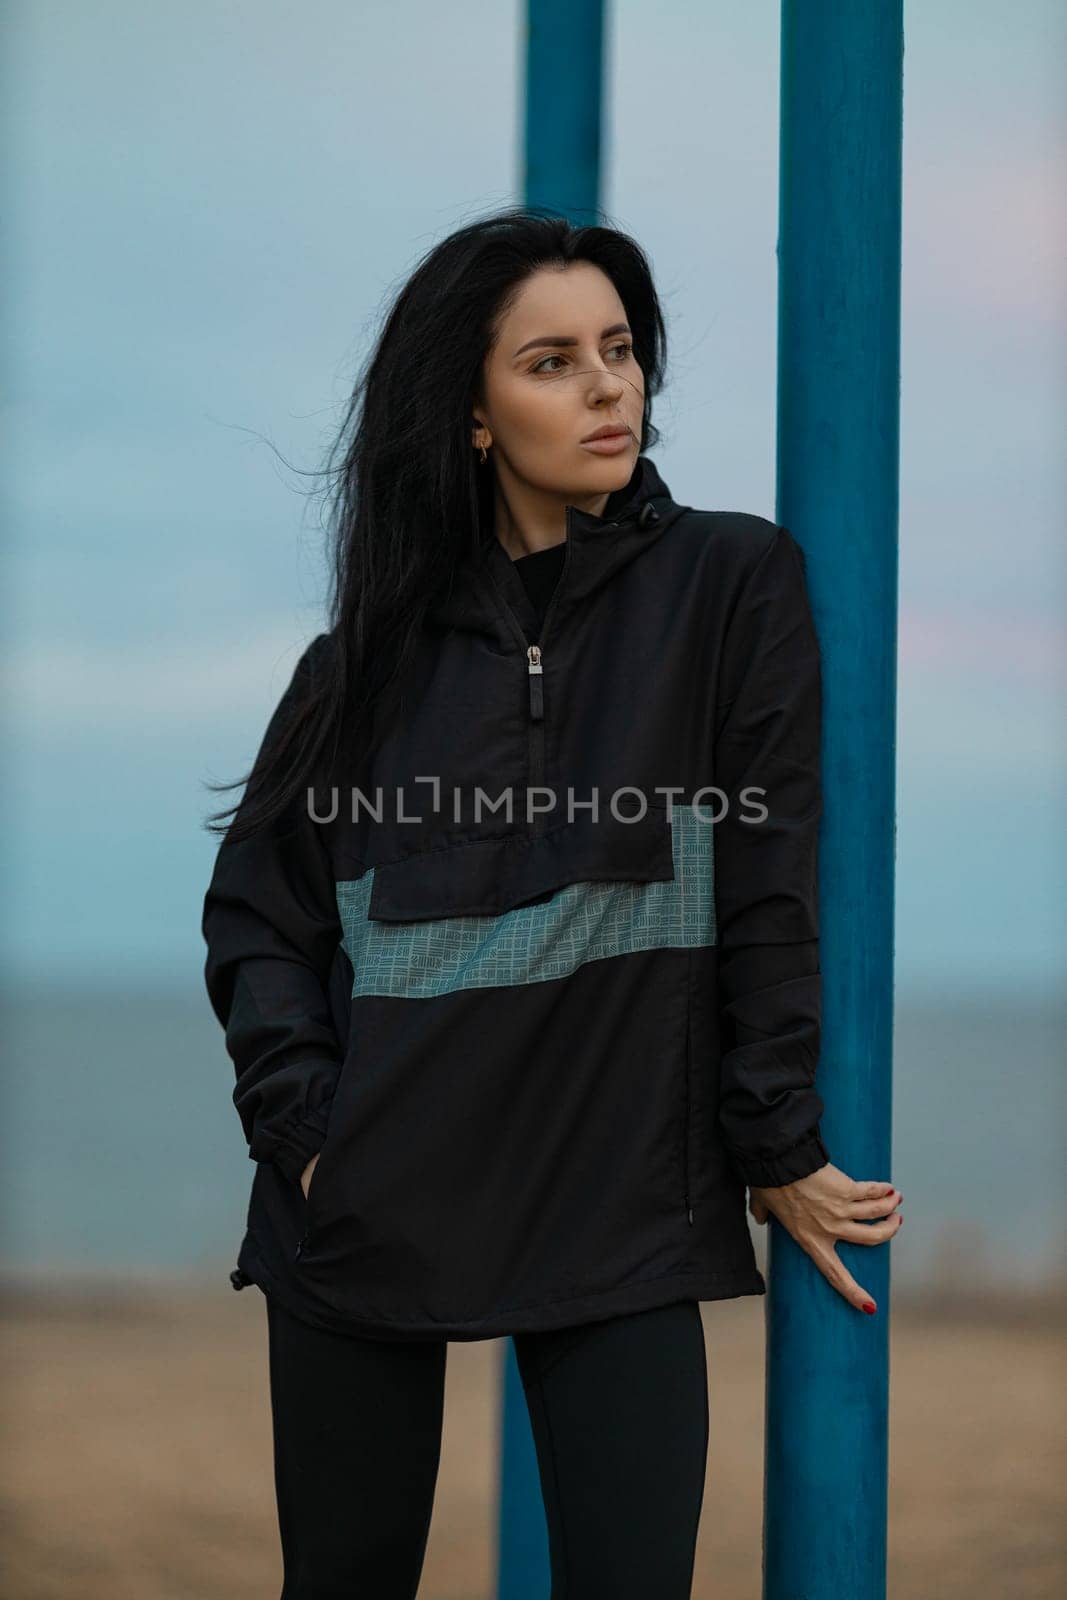 Fitness girl on outdoor sports ground in an anorak in windy weather by but_photo